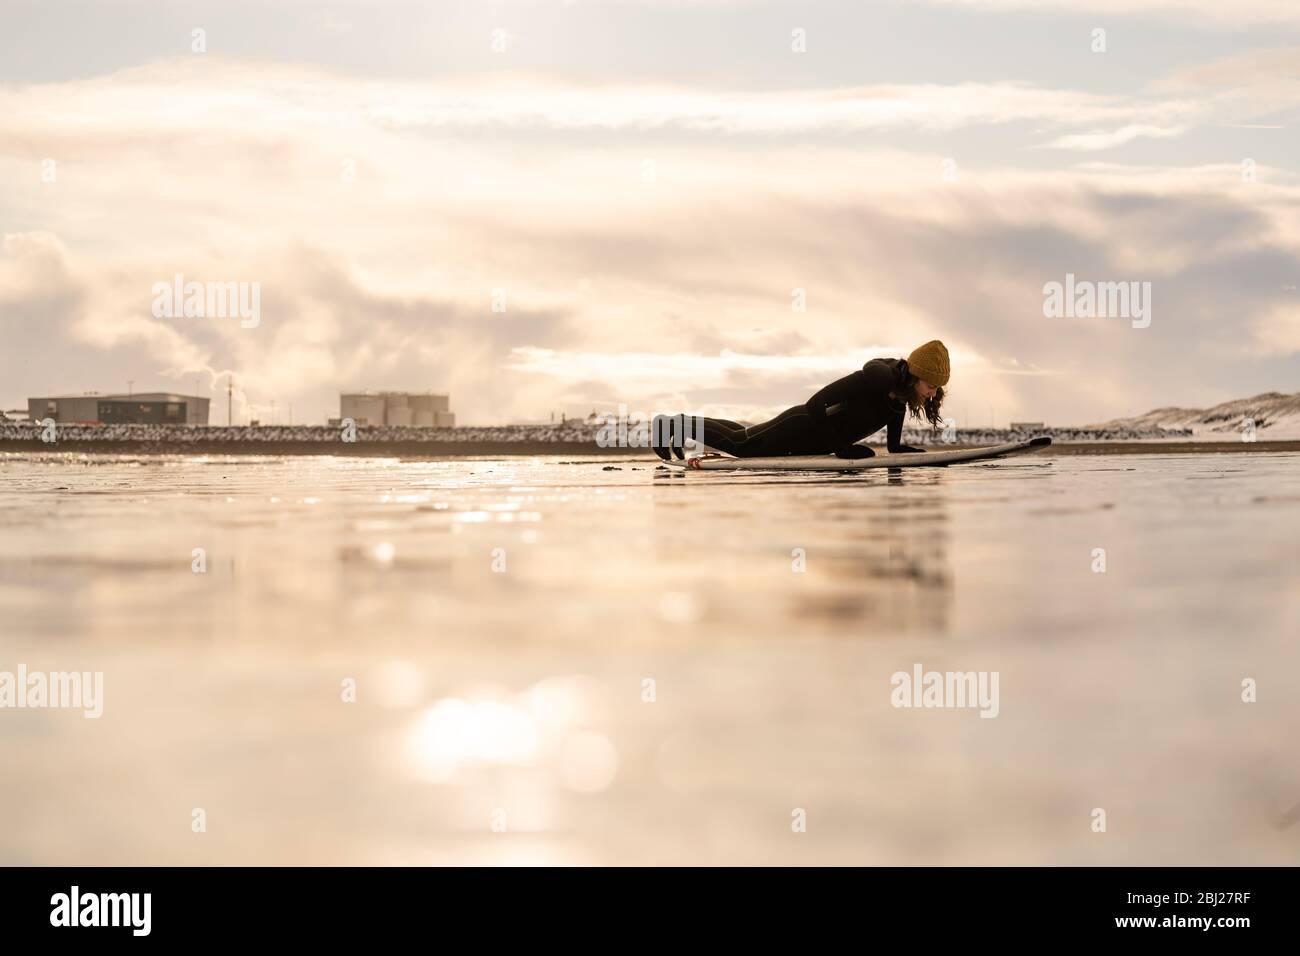 Silhouette of a woman with a surfboard lying on a beach with industrial units on the far horizon. Stock Photo